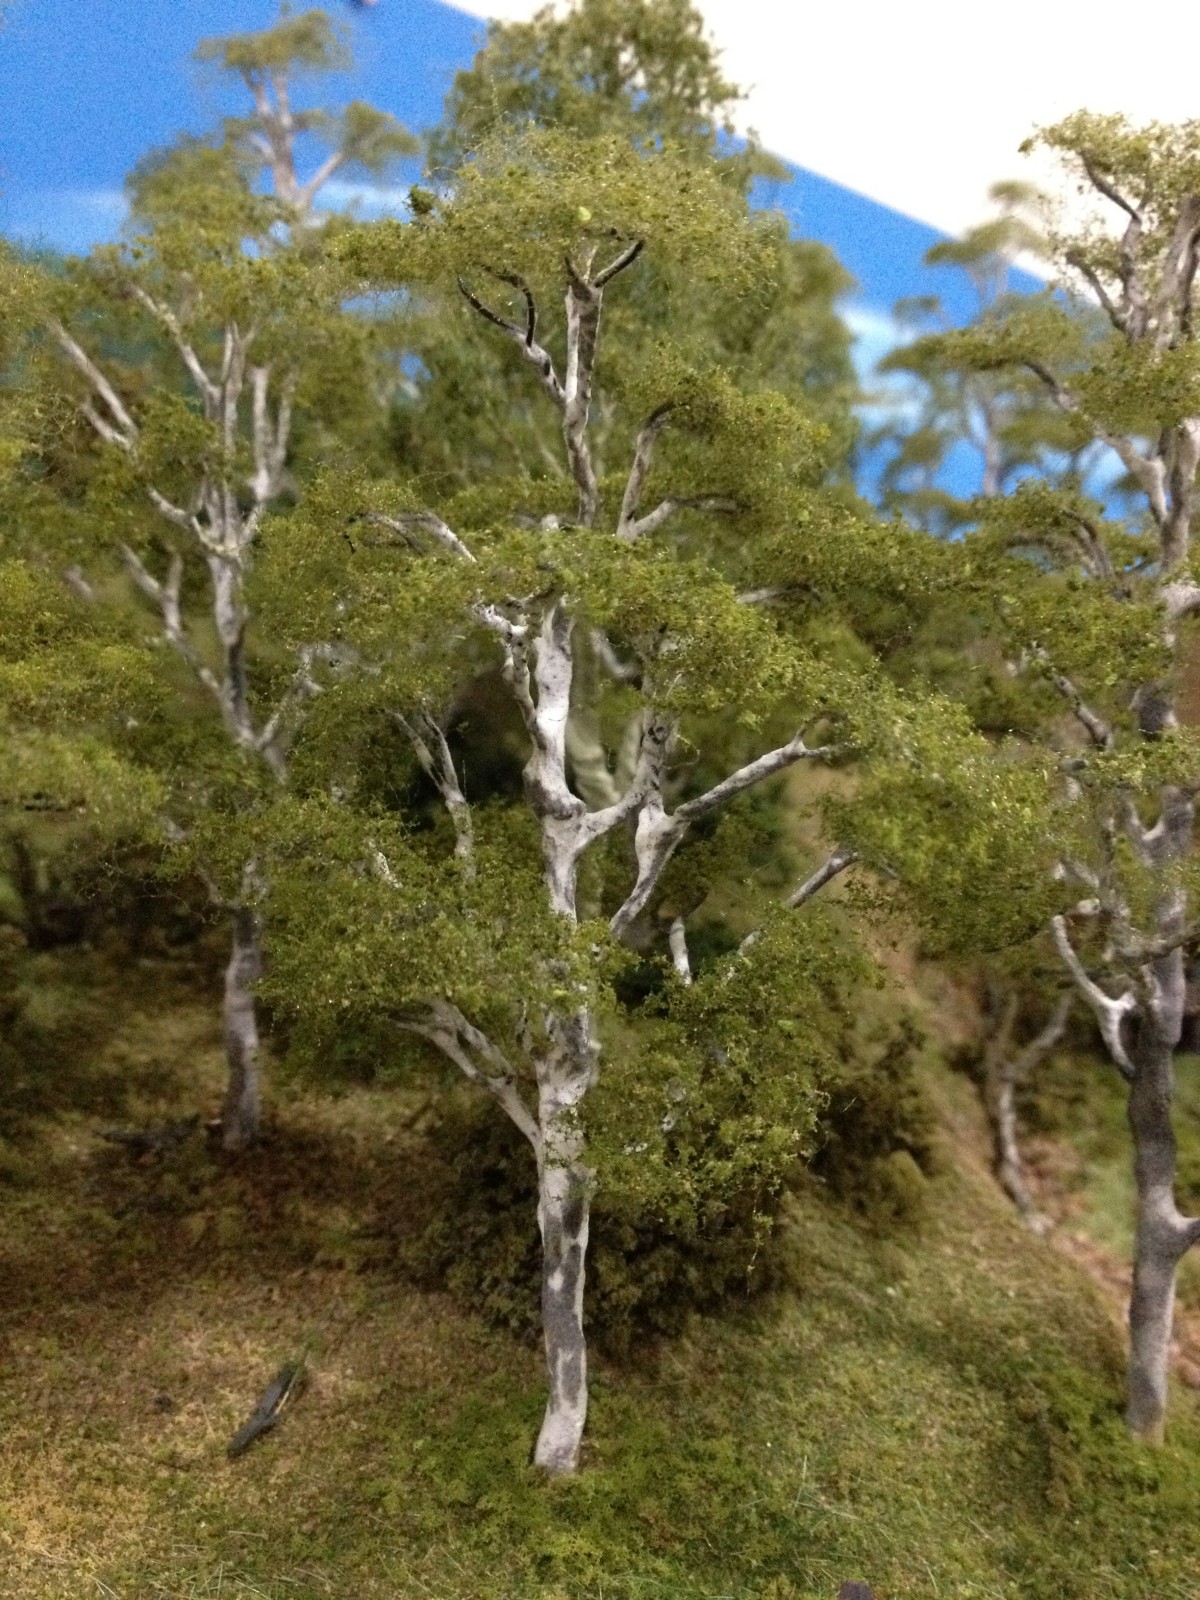 How to make realistic model trees